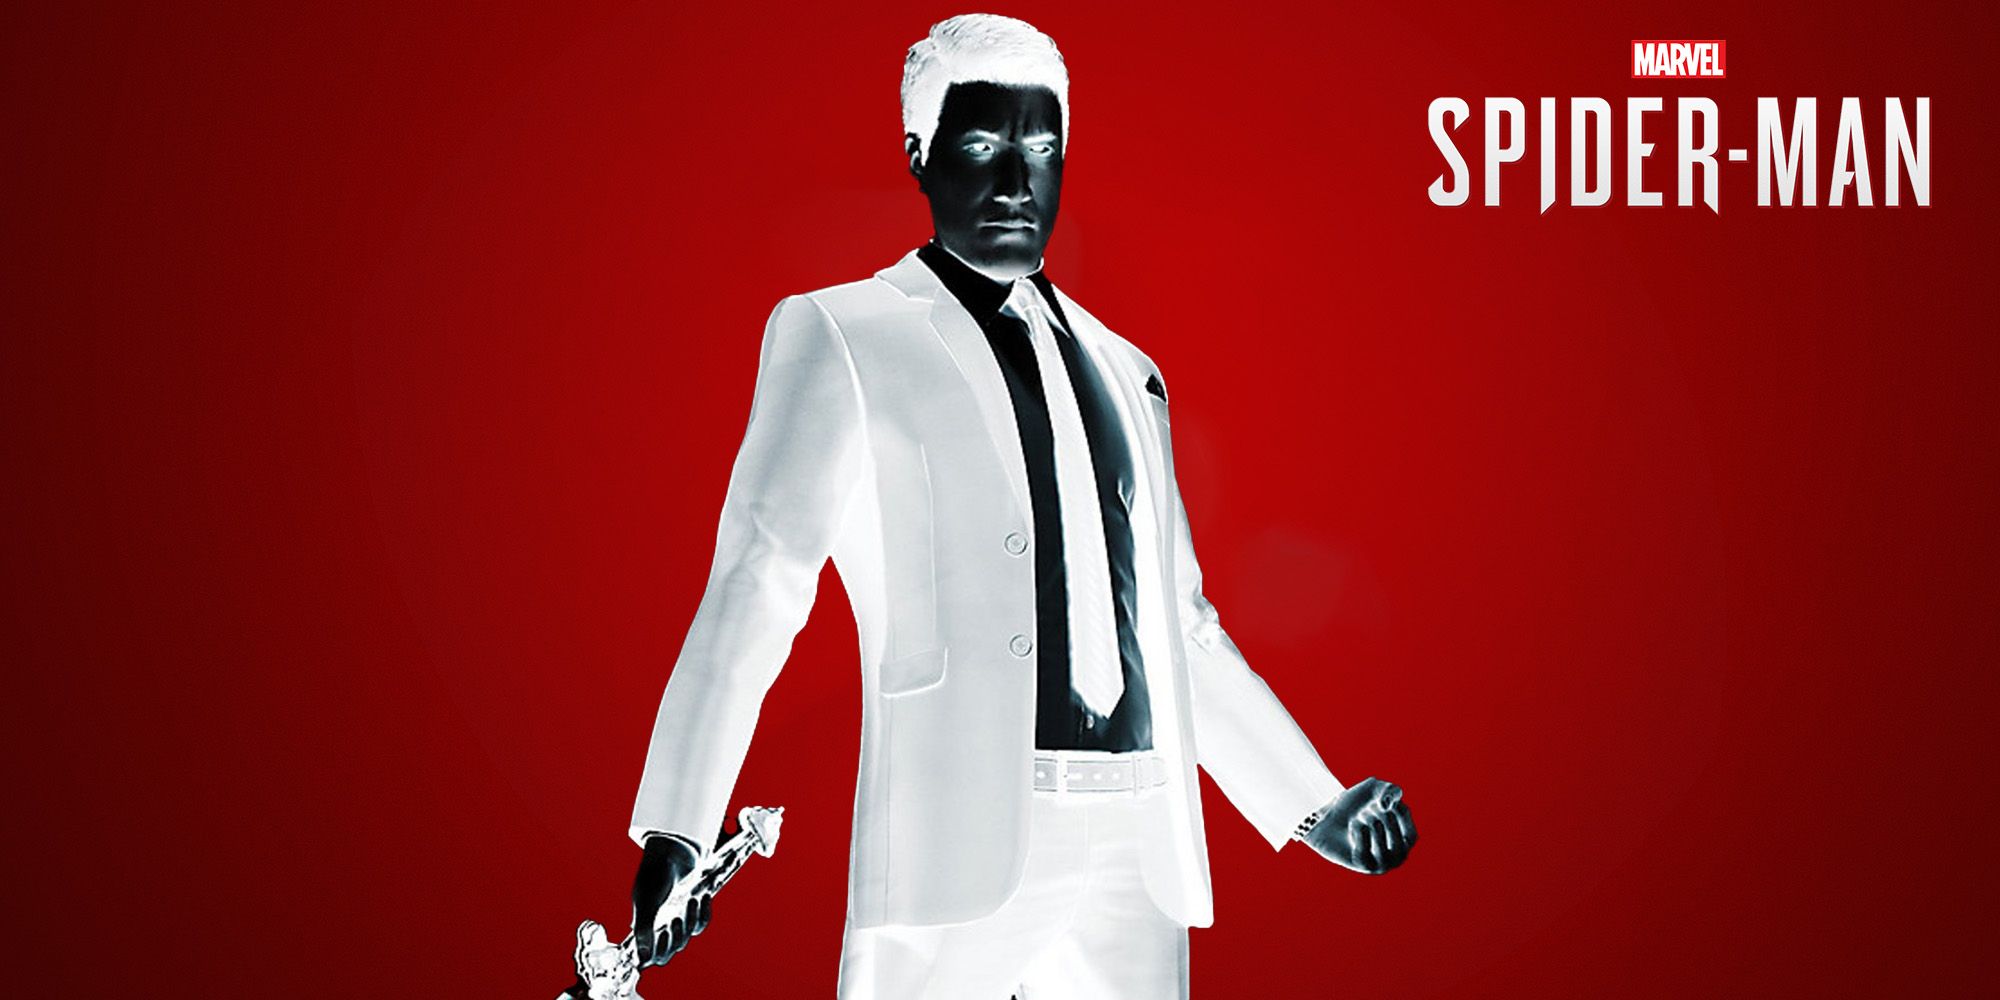 Mister Negative holding his sword and clenching fist. Red background. Spider-Man logo in top right of image. 